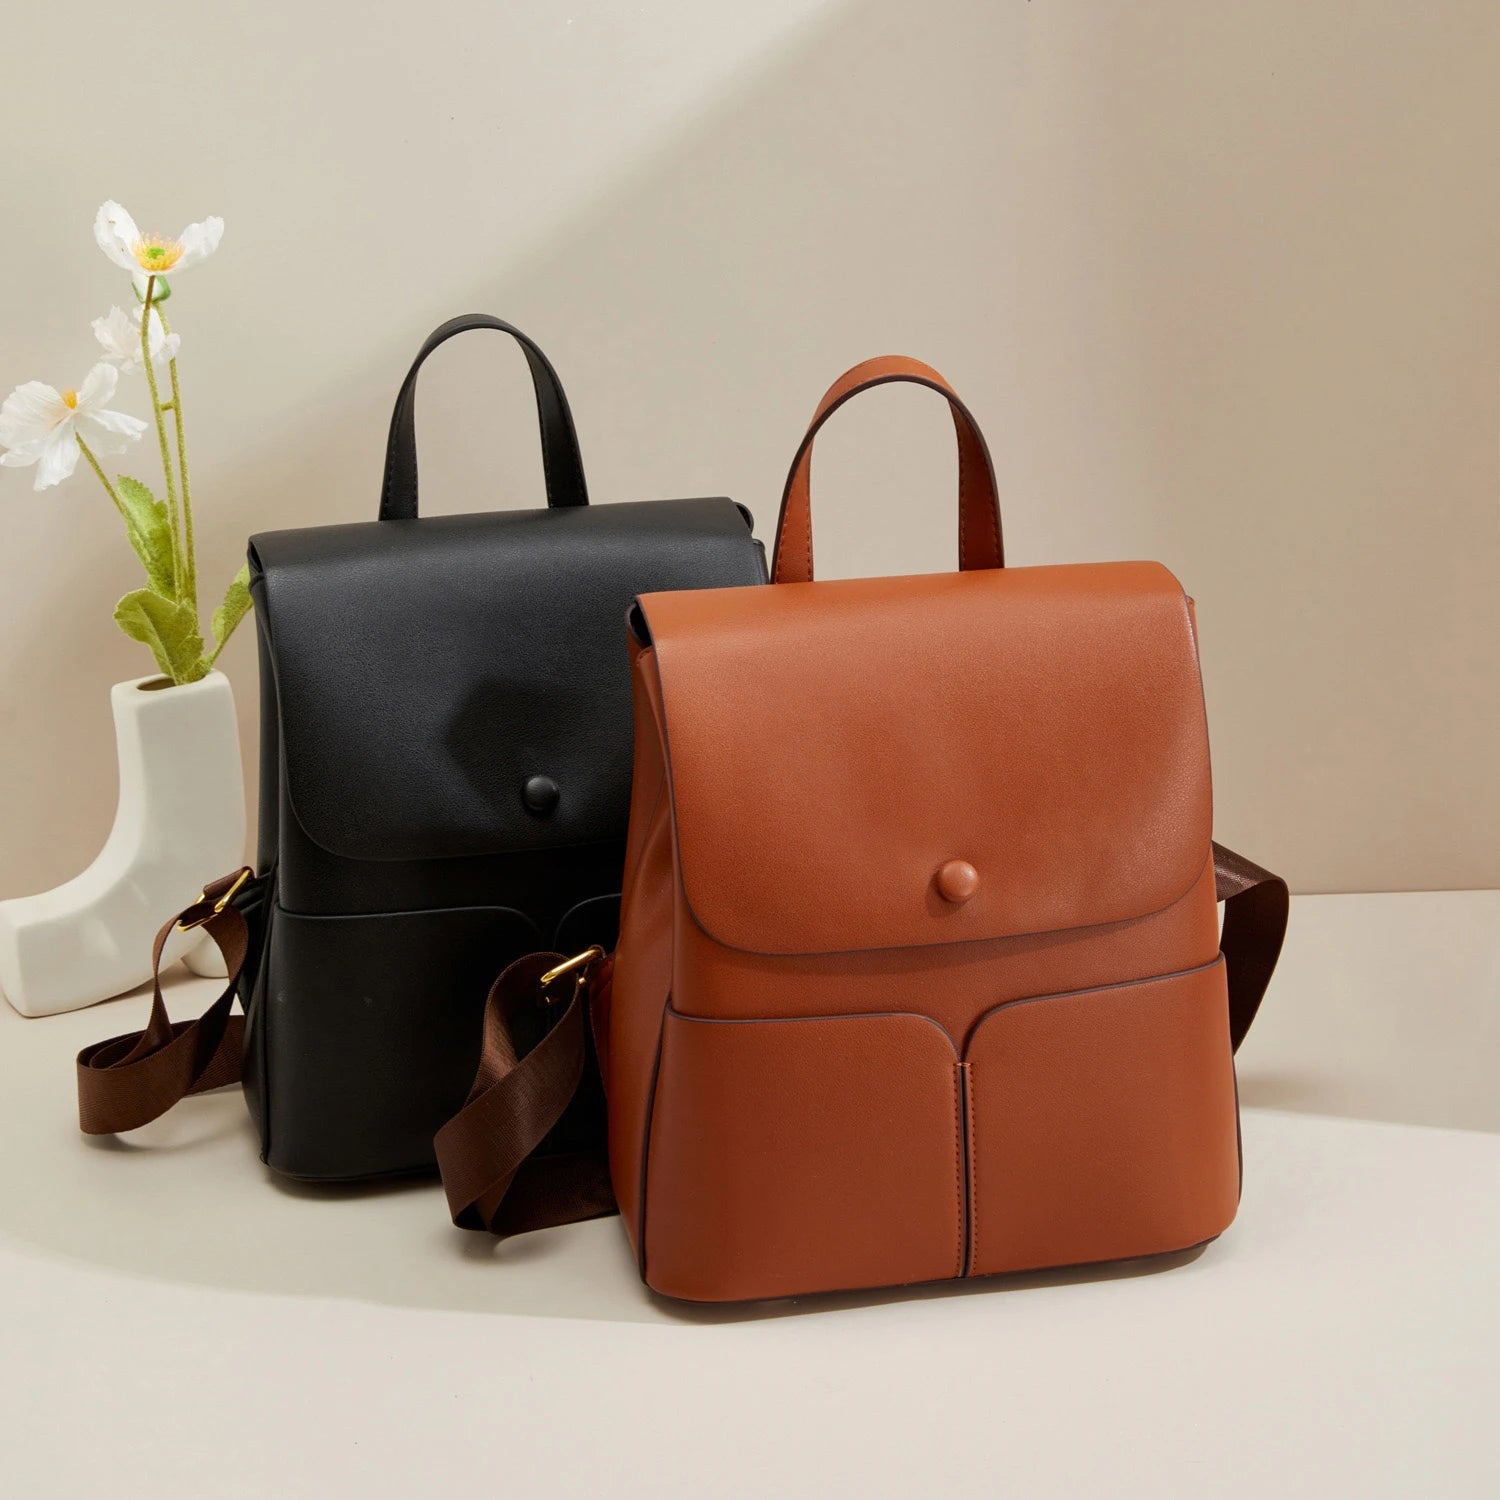 ooobag brown leather backpack for women